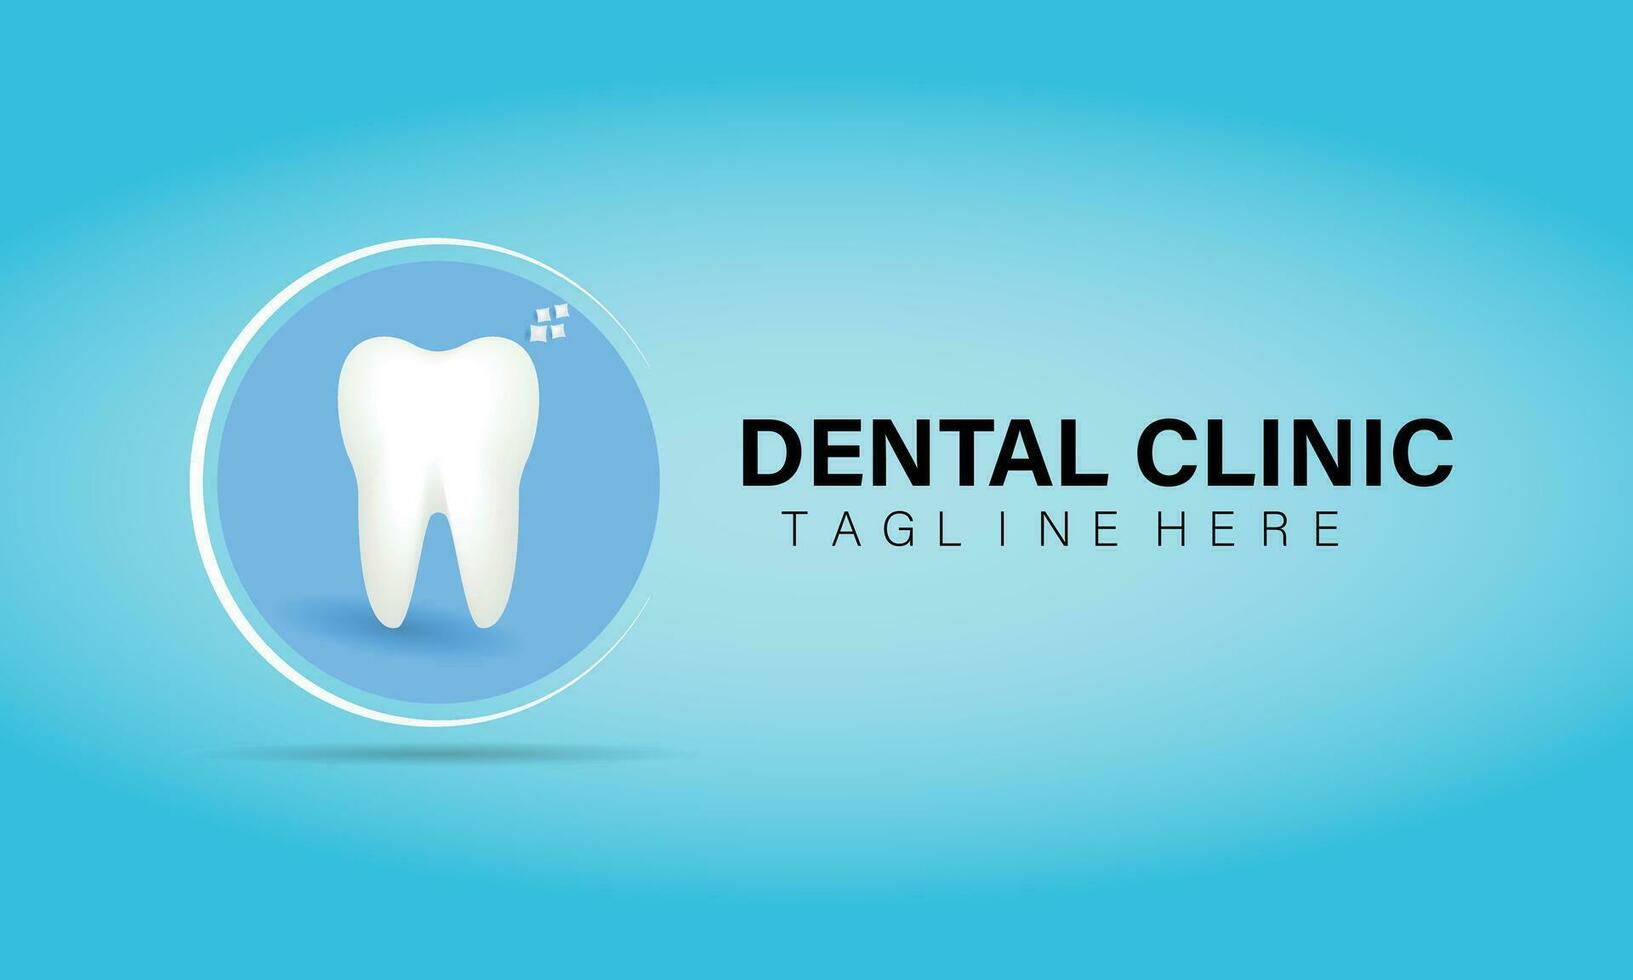 Healthy tooth, Dental care clinic logo, vector illustration. Clean dental health and oral hygiene poster design.